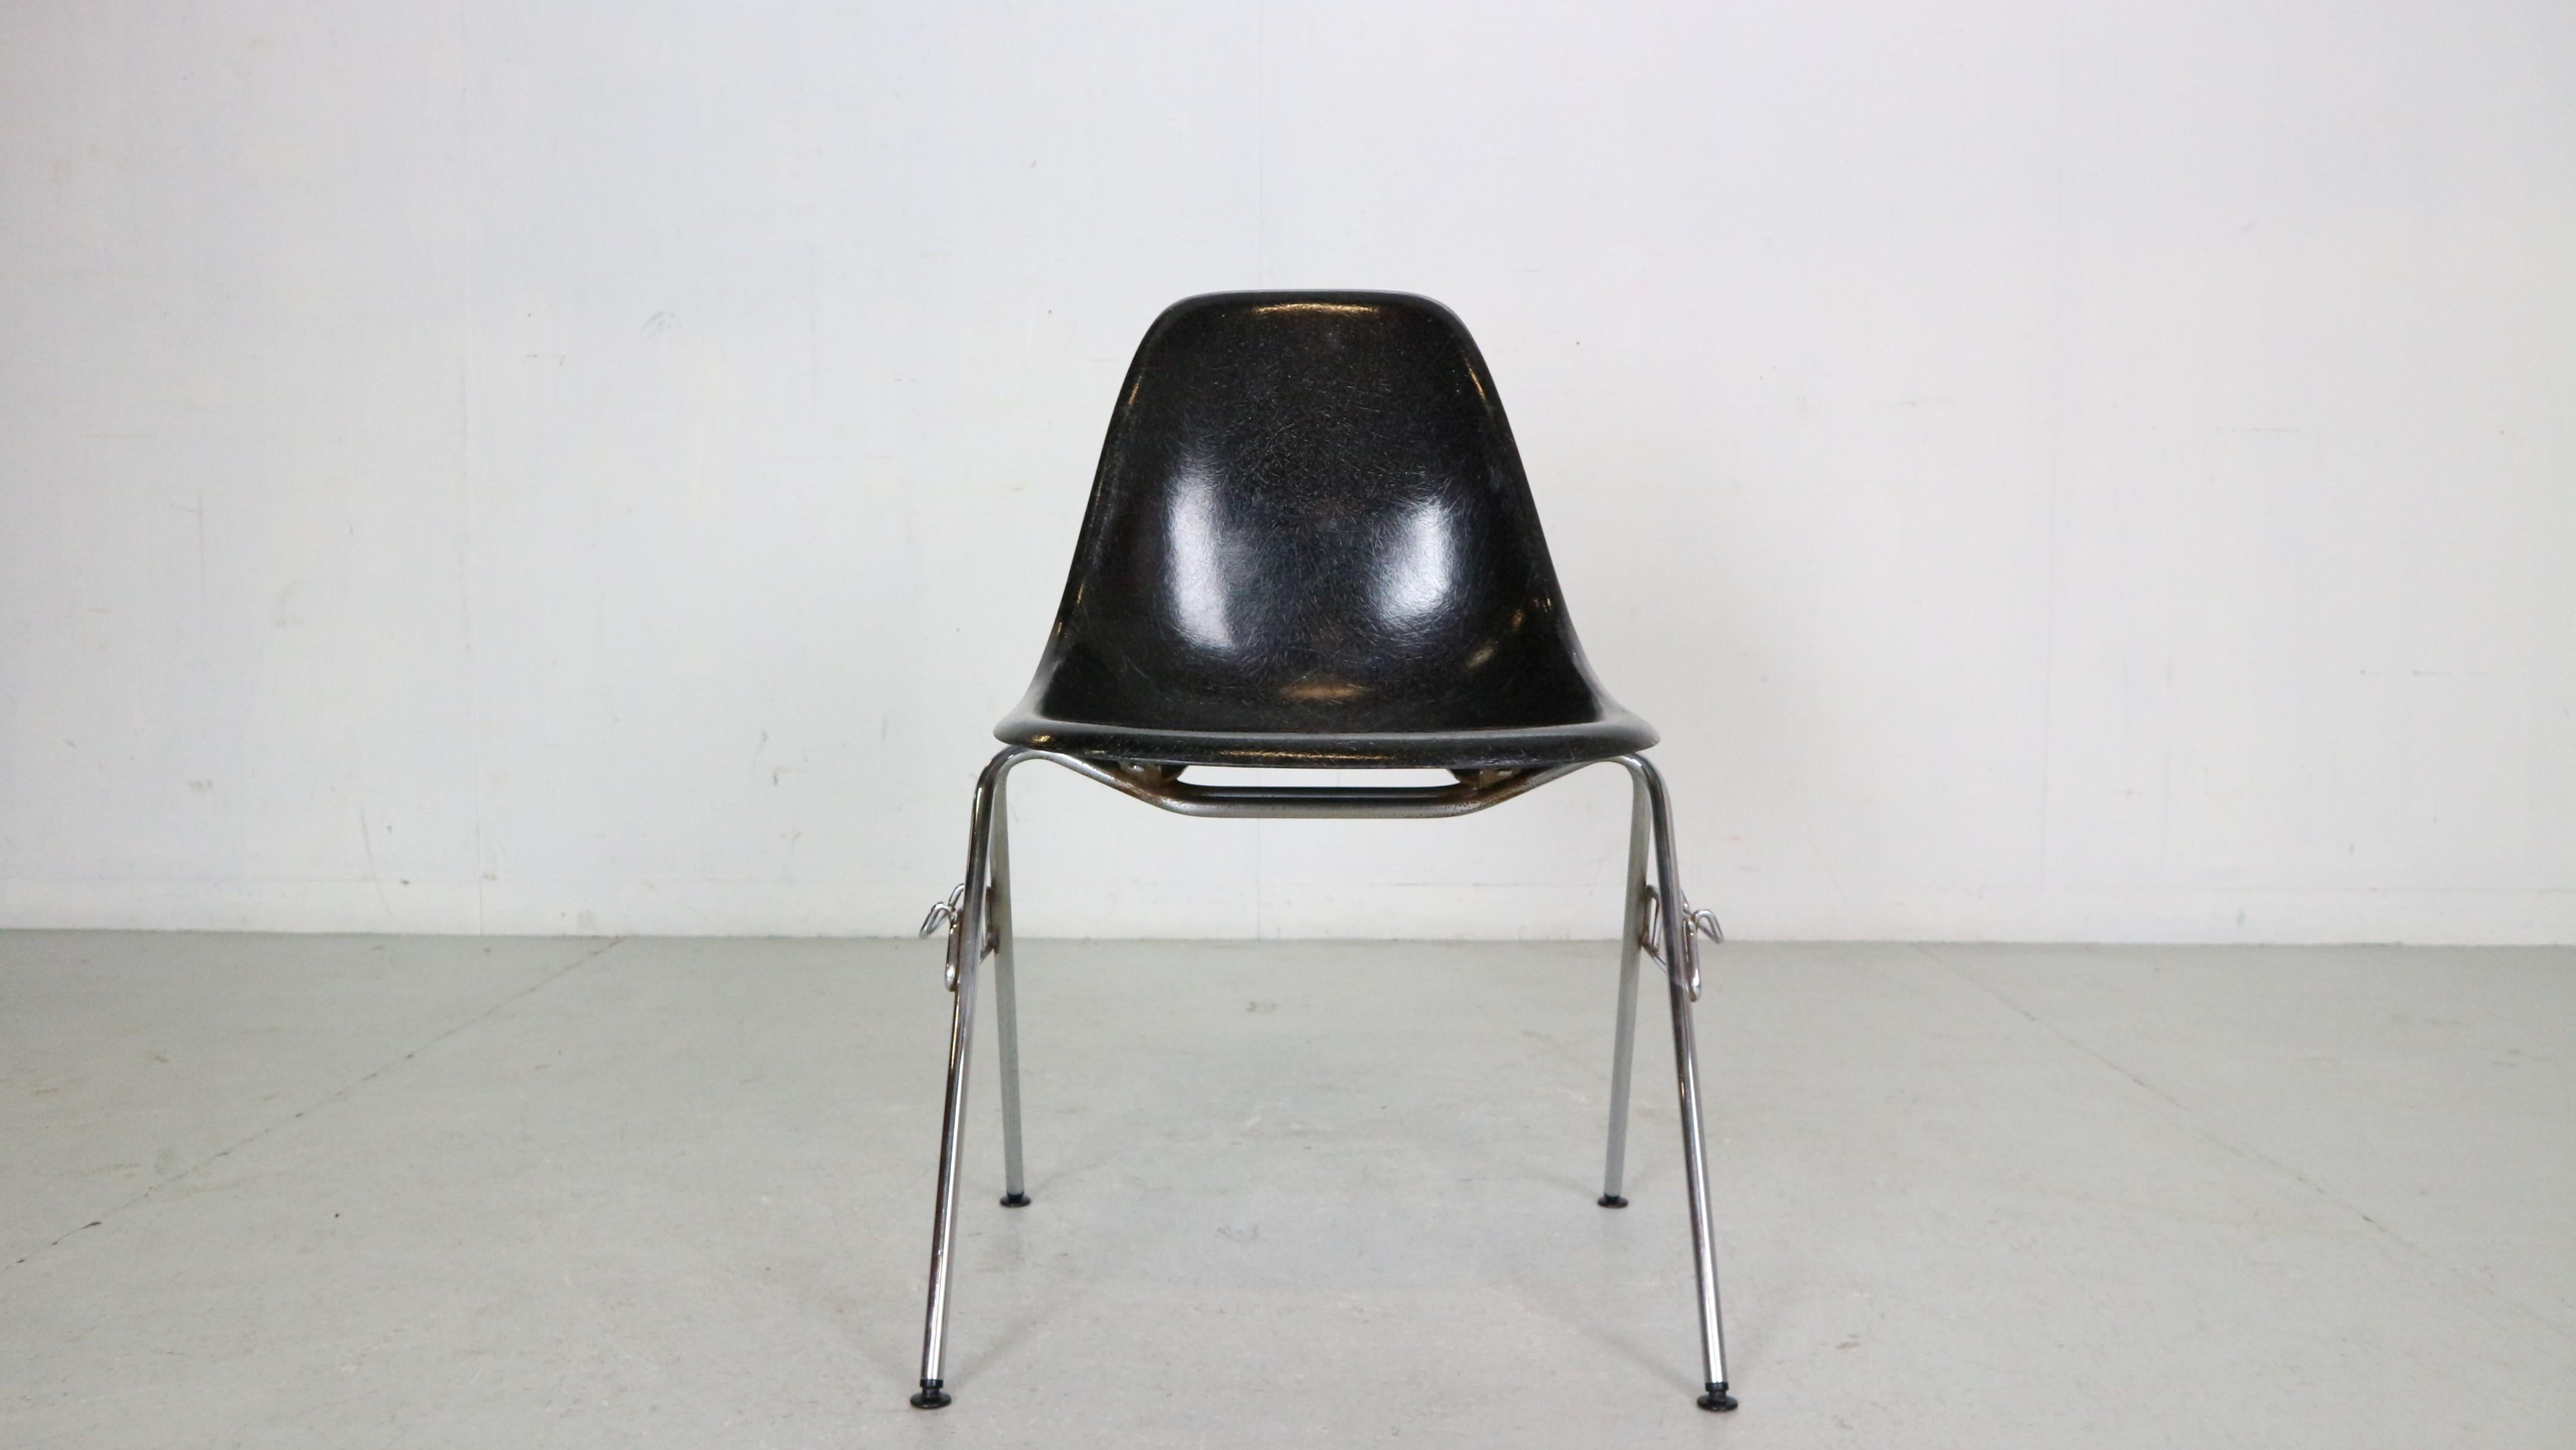 Mid- Century modern period stackable dinning room chairs designed by famous furniture designers Charles & Ray Eames for Herman Miller in 1970's circa.

A molded black fiberglass glass shell with great structure is mounted on a chromed stackable DSS